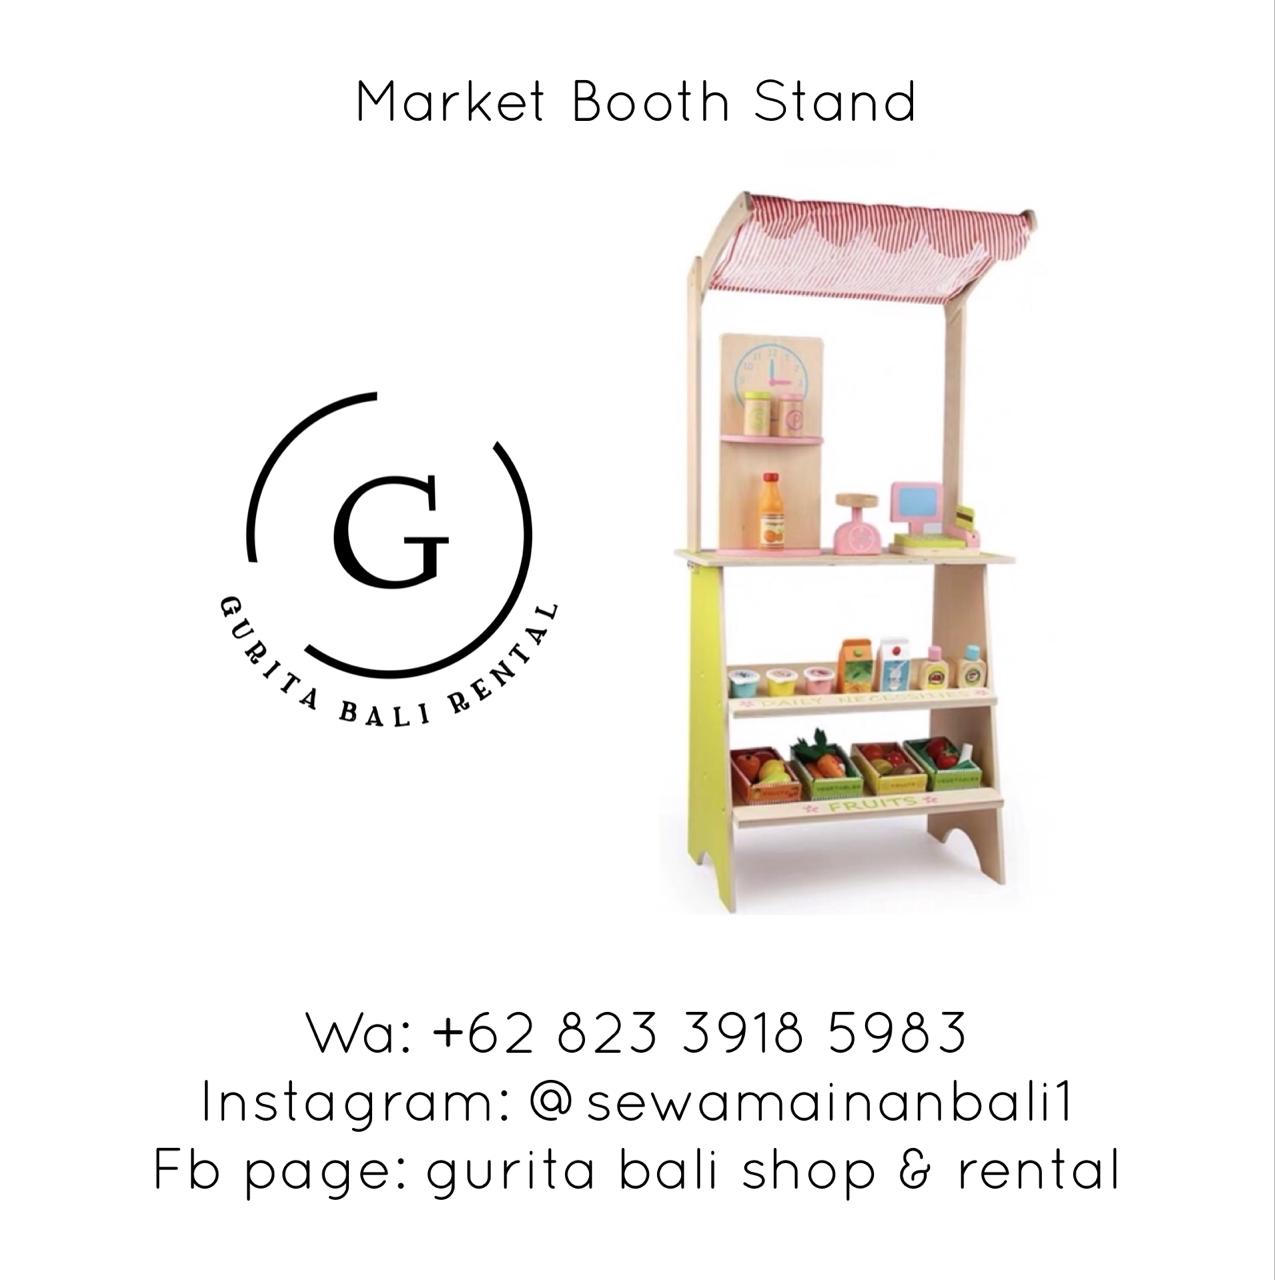 MARKET BOOTH STAND